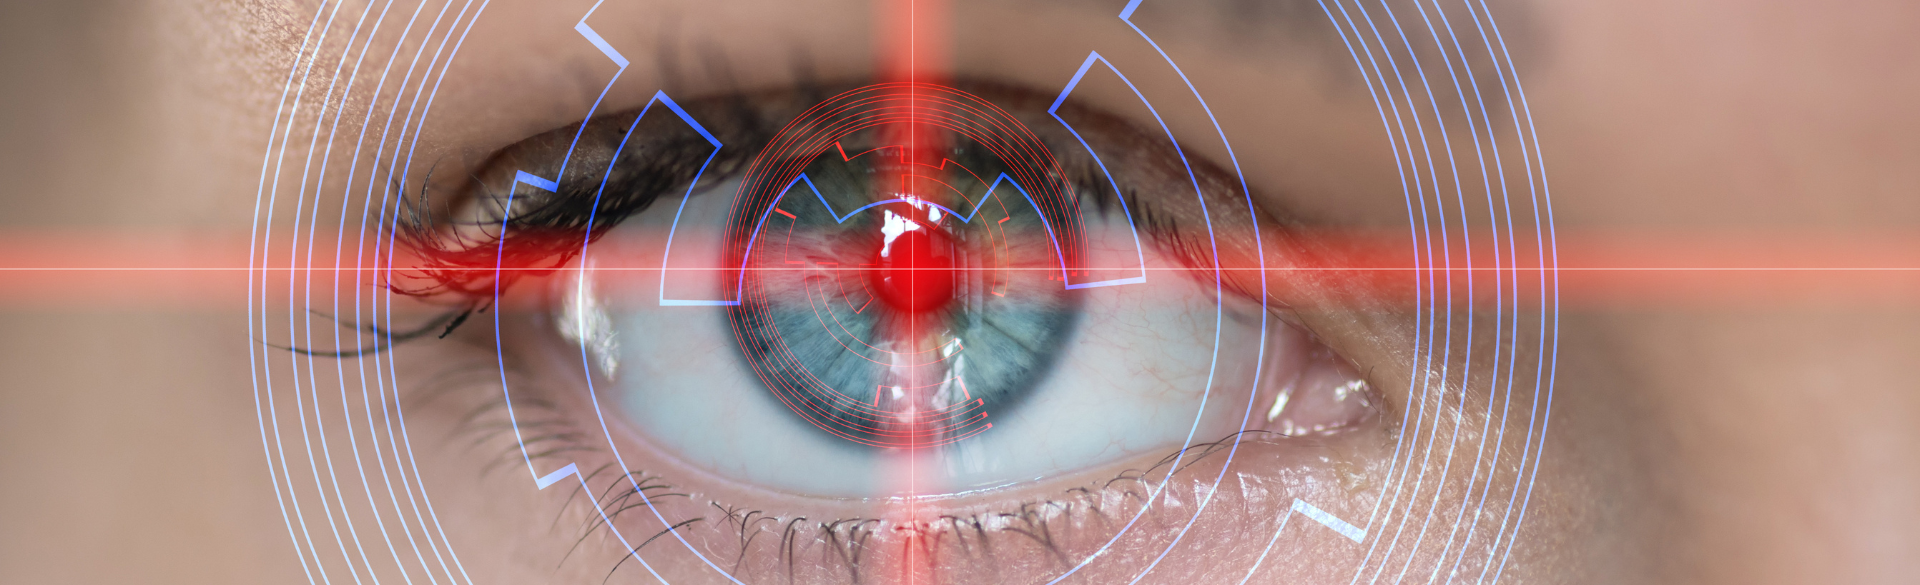 The Eyes May Hold the Key to Early Parkinson’s Disease Detection